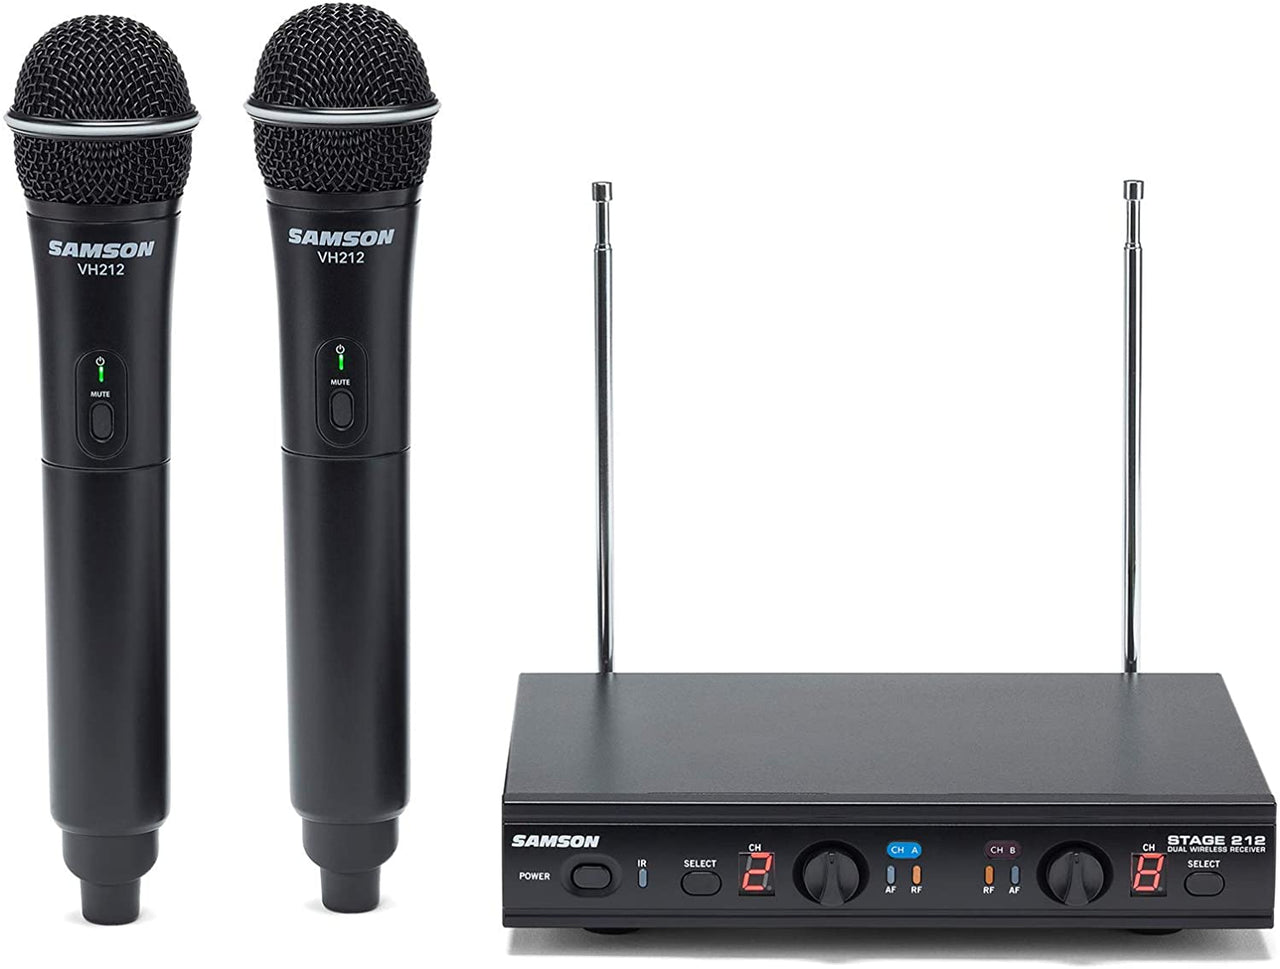 SAMSON Stage 212 Dual VHF Handheld Wireless Microphones for Church Sound Systems